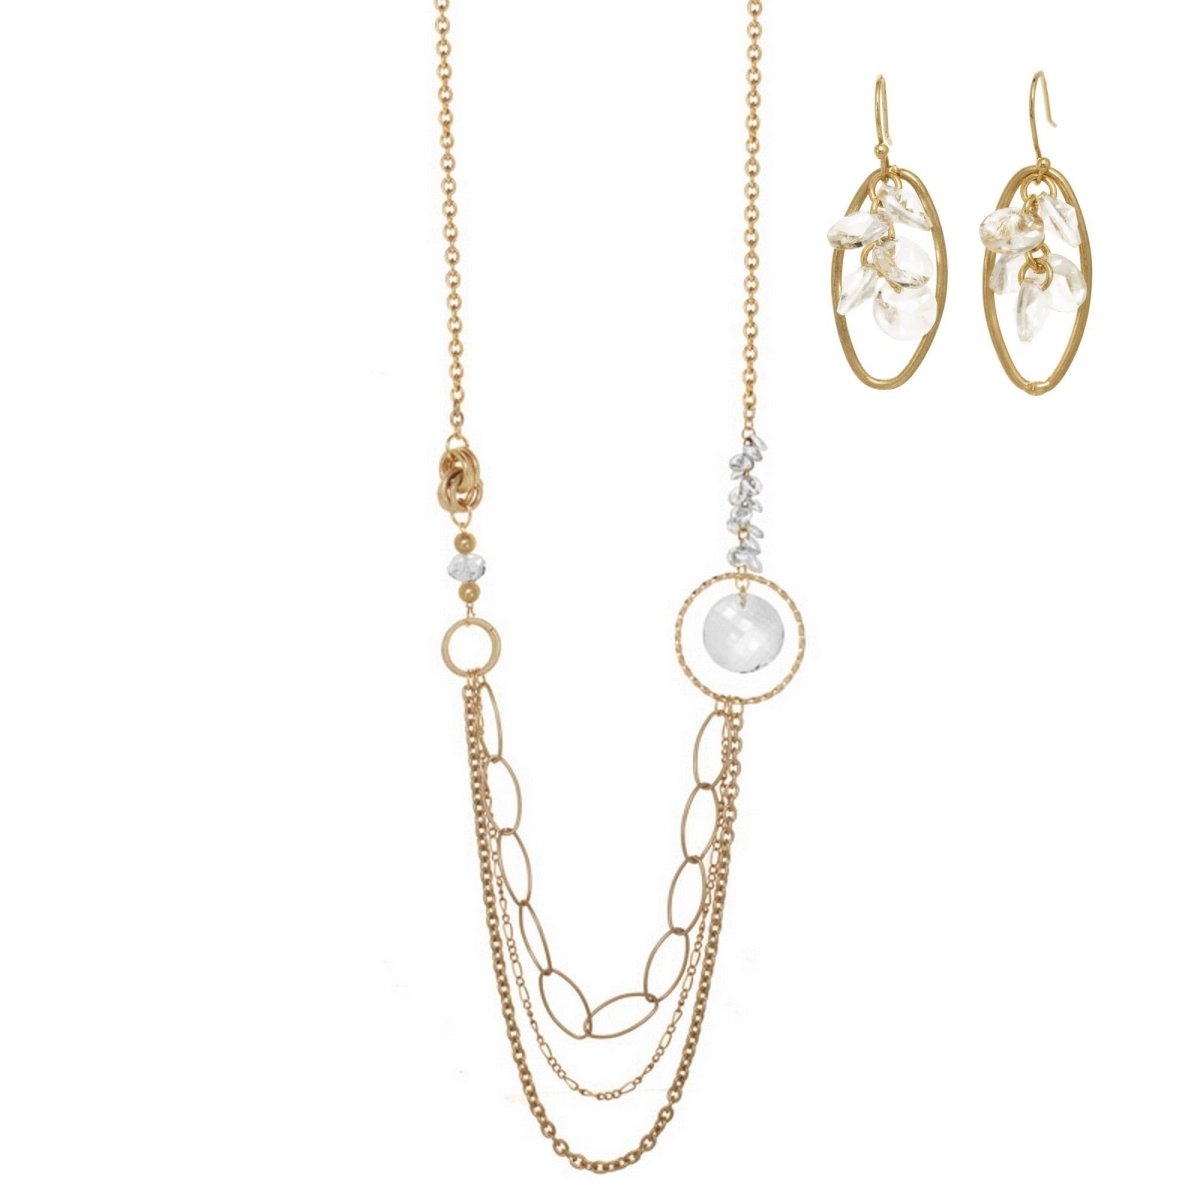 Picture of J&H Designs JHE9086 J&H Designs Swag Crystal & Goldtone Multi-Chain Necklace and Earrings Jewelry Set - gold crystal